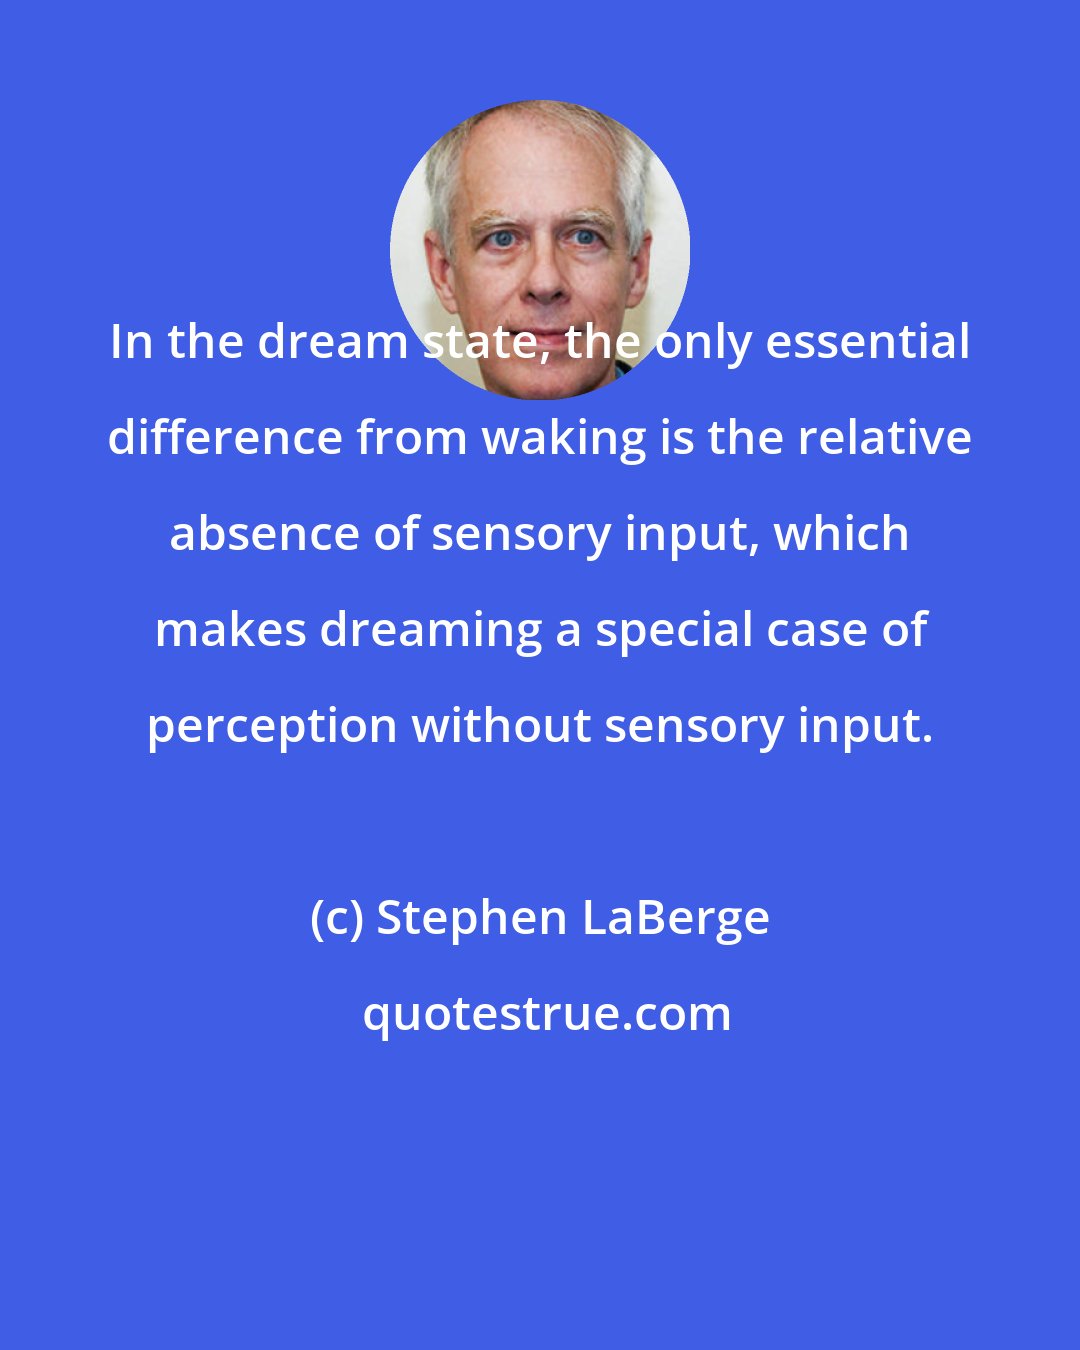 Stephen LaBerge: In the dream state, the only essential difference from waking is the relative absence of sensory input, which makes dreaming a special case of perception without sensory input.